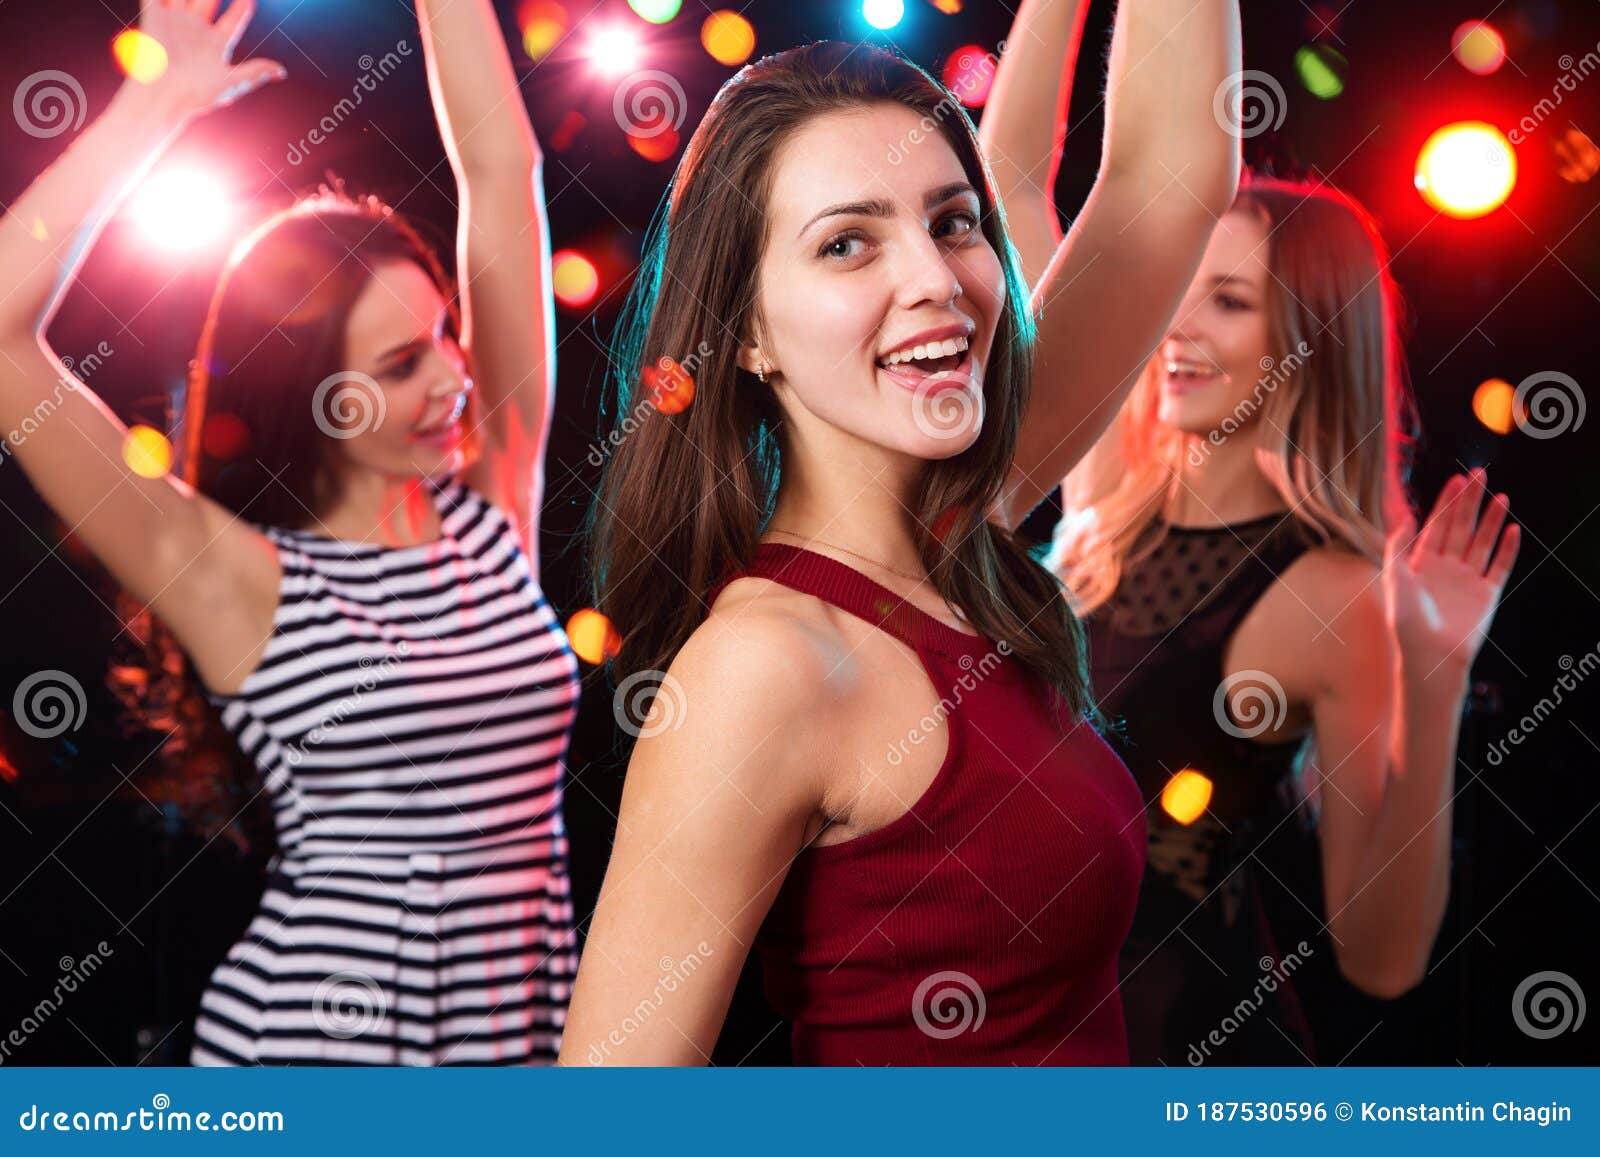 Beautiful Girls Have Fun at a Christmas Party Stock Photo - Image of ...